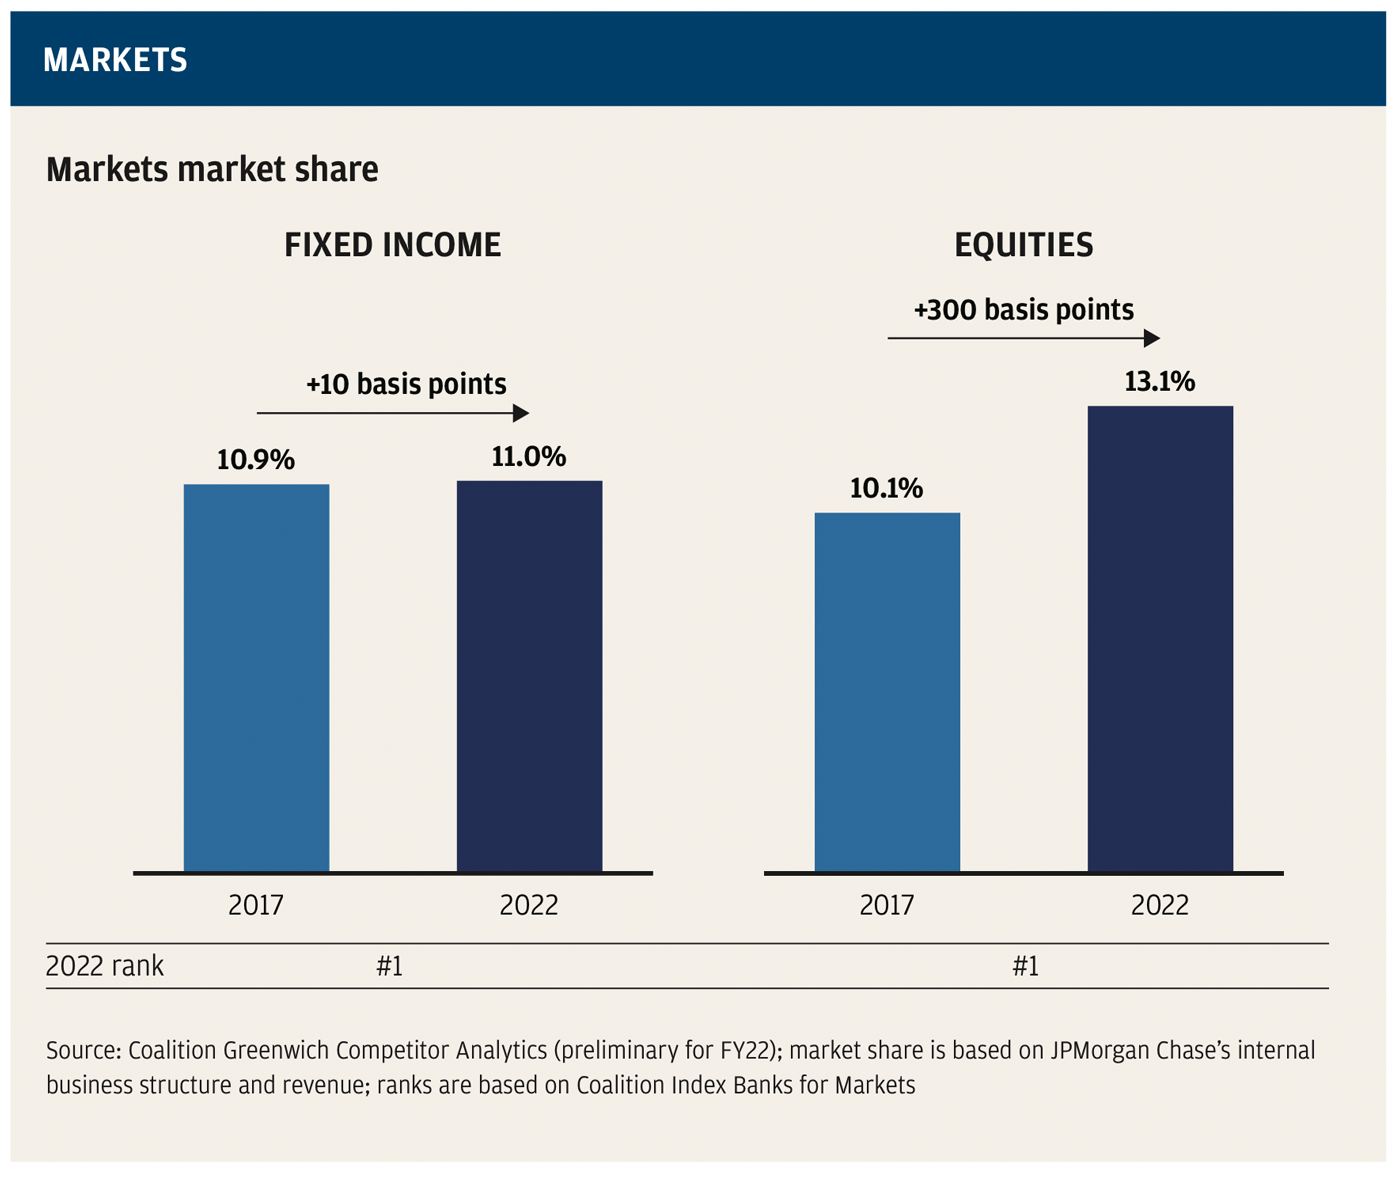 Markets market share for fixed income and equities